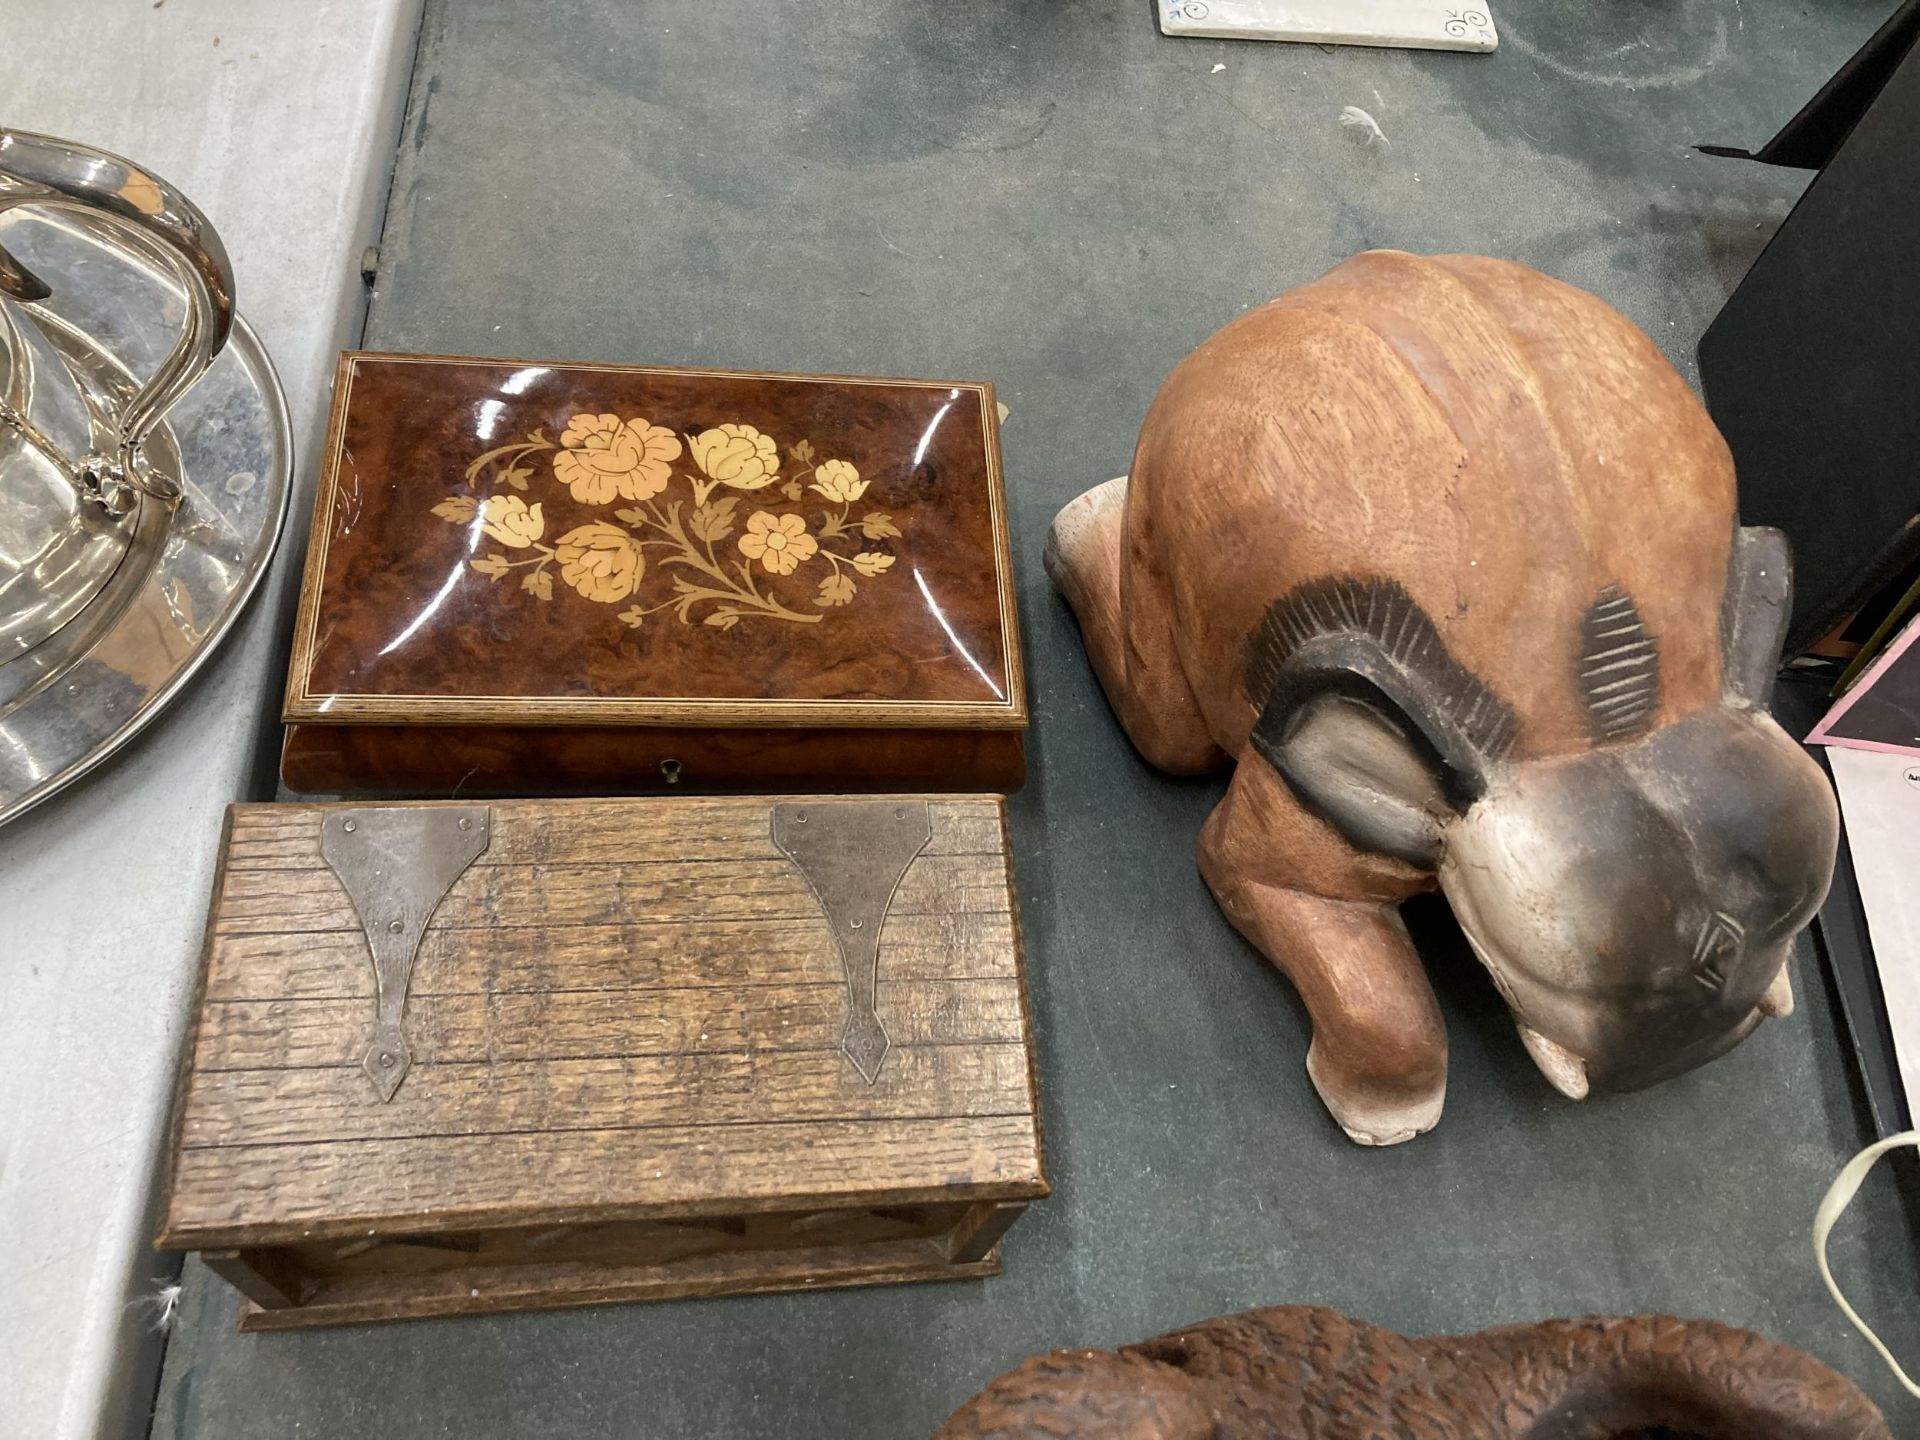 A COLLECTION OF WOODEN WARES,ROCKING PIG FIGURE, INLAID BOX, EAGLE FIGURE - Image 4 of 4